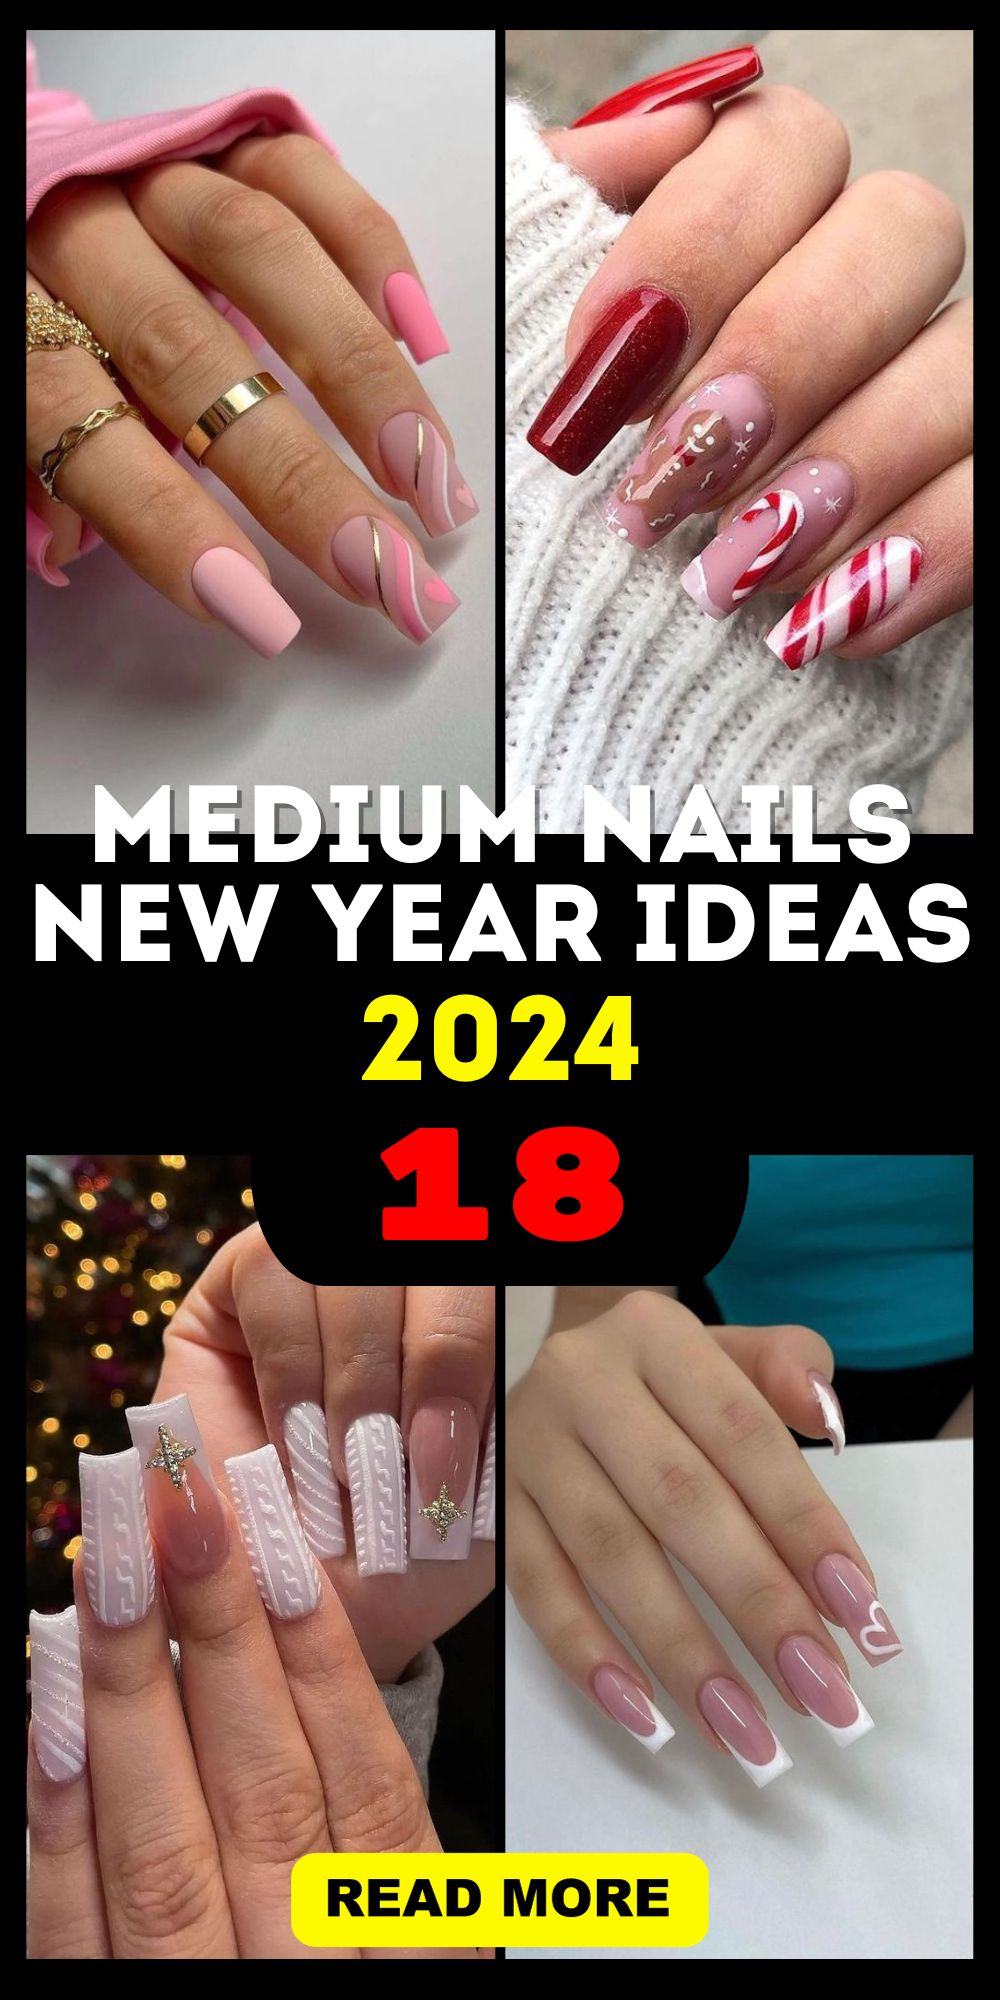 Medium Nails for New Year 2024: Acrylic Square, Winter Designs, and More